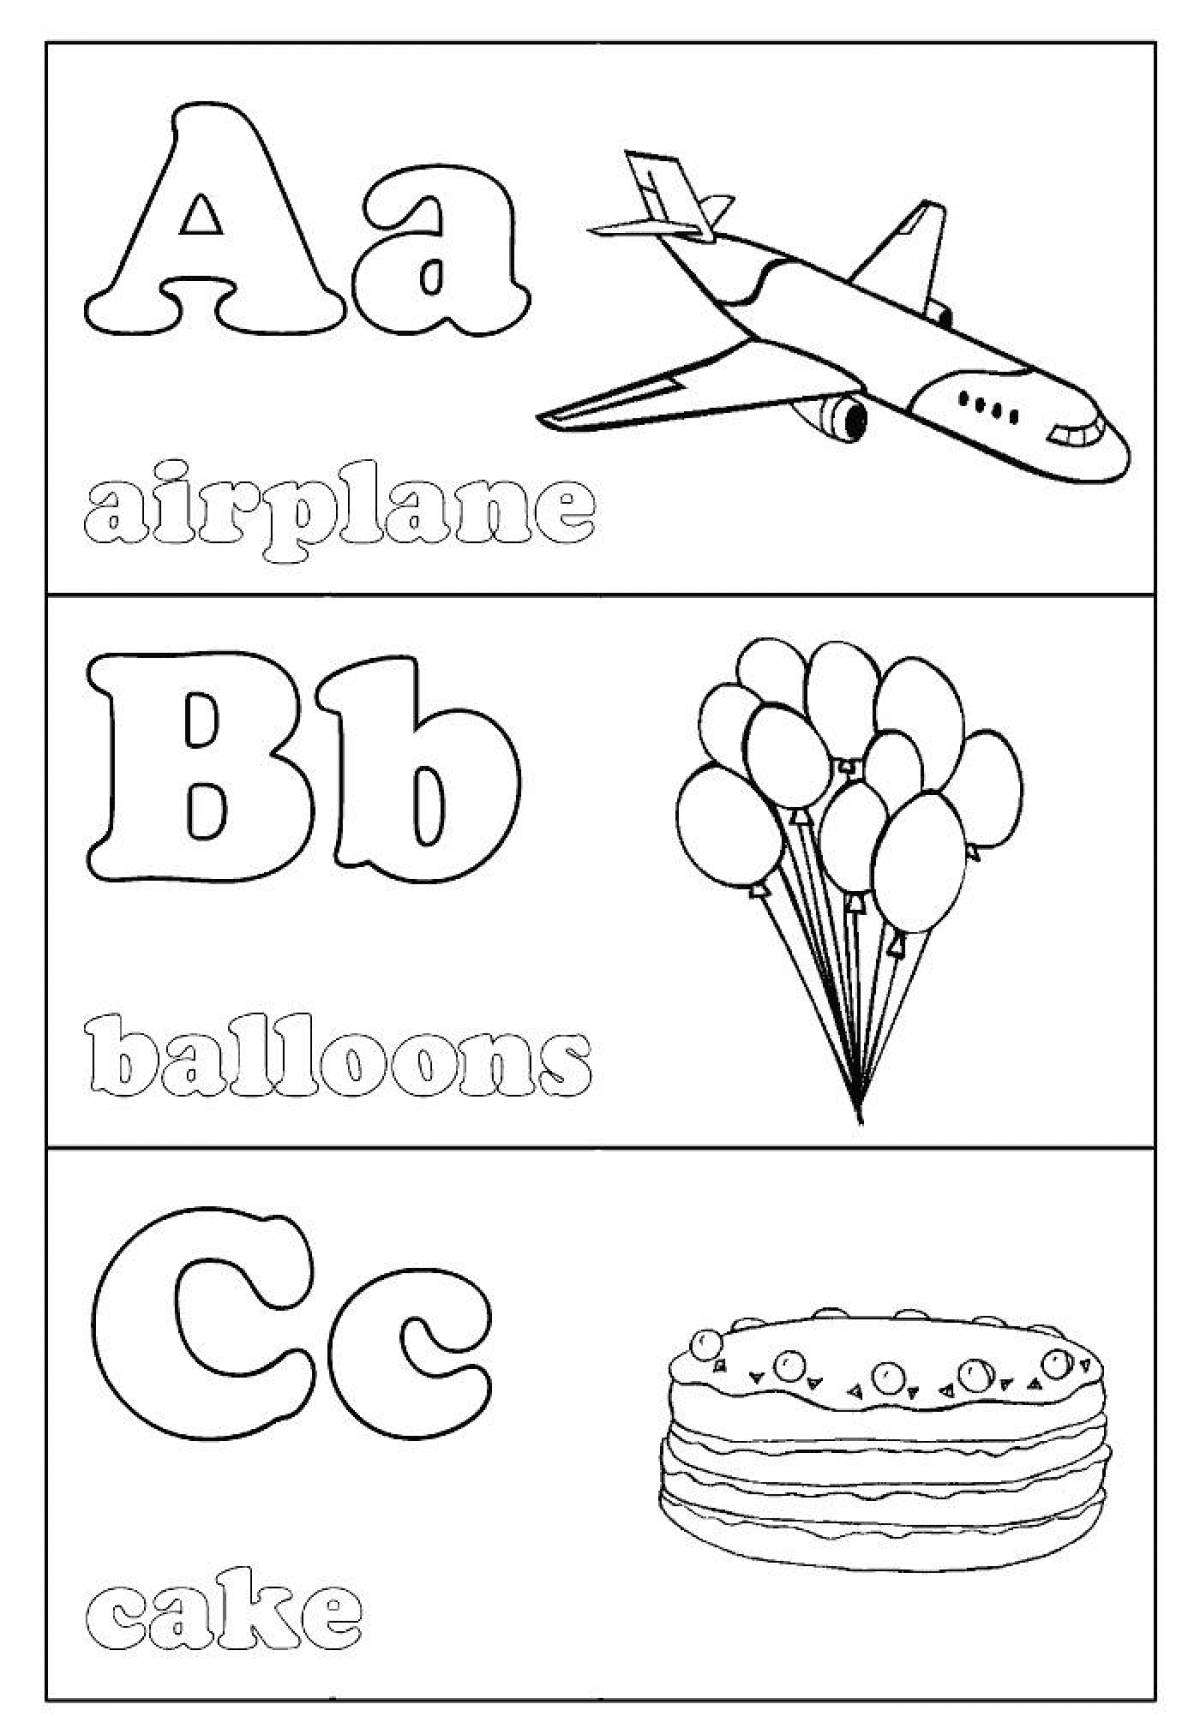 Colorful english alphabet coloring page for kids